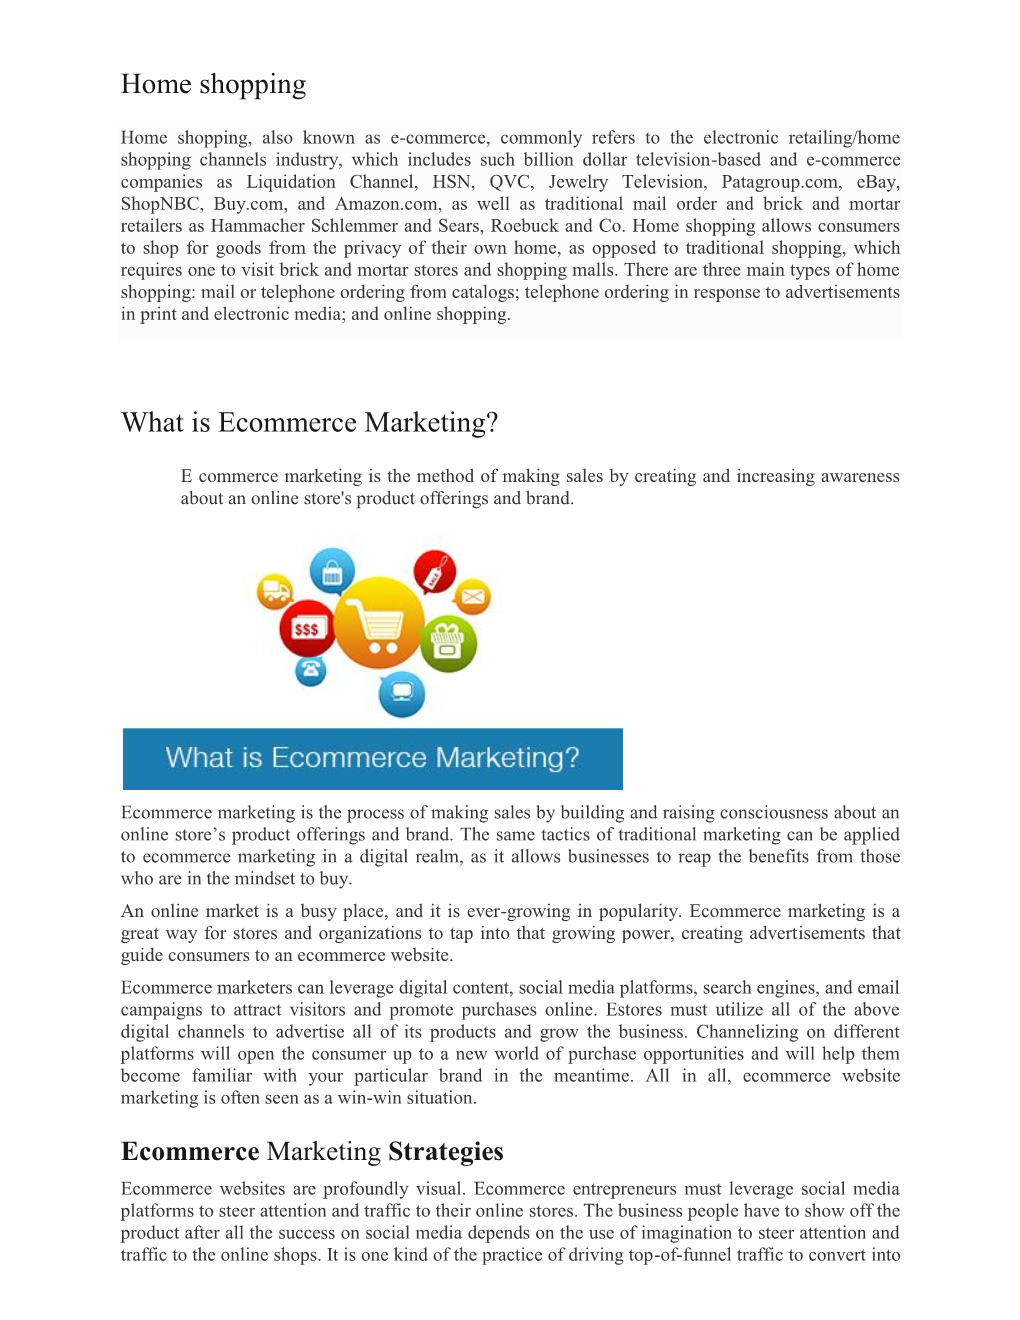 Home Shopping What Is Ecommerce Marketing?